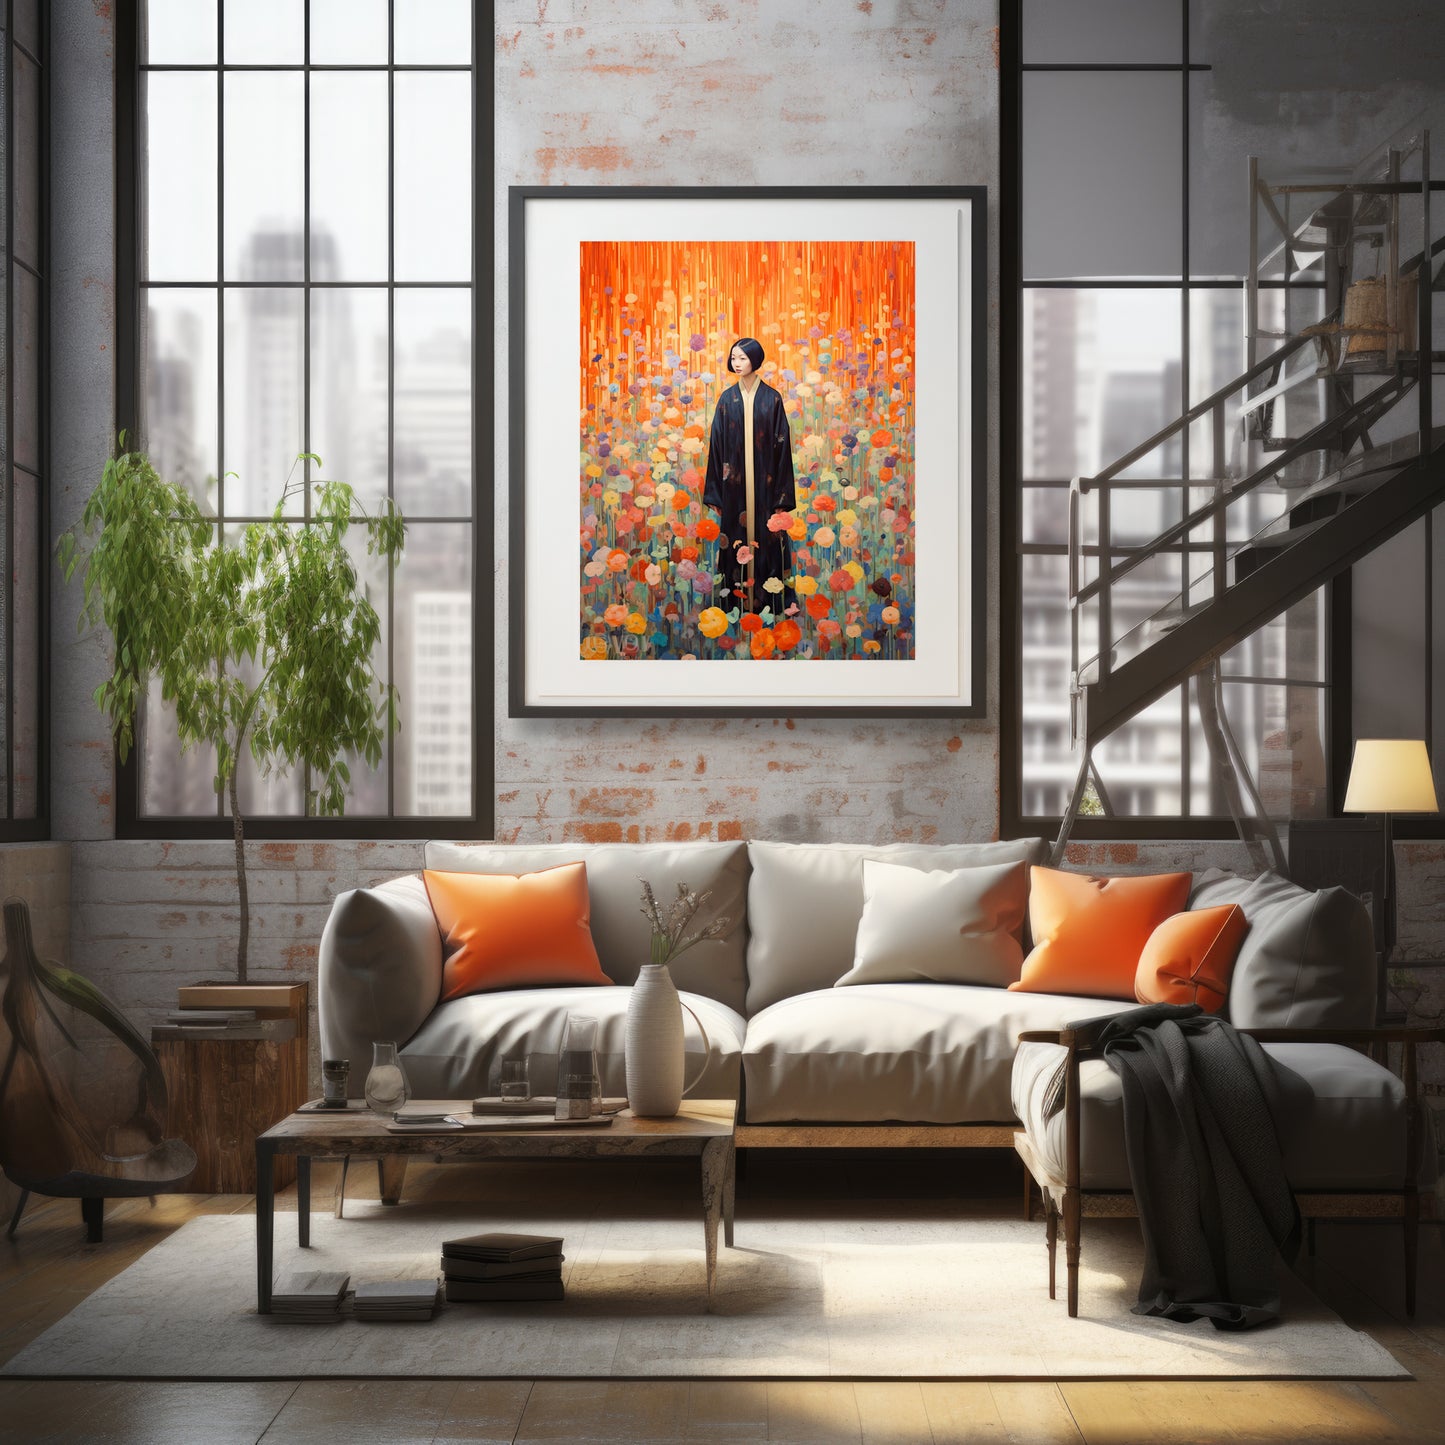 Artwork print featuring a woman in a traditional black robe, standing amidst a vibrant field of colorful flowers, with a backdrop of cascading orange and yellow hues. This fine art print is a captivating visual fable.